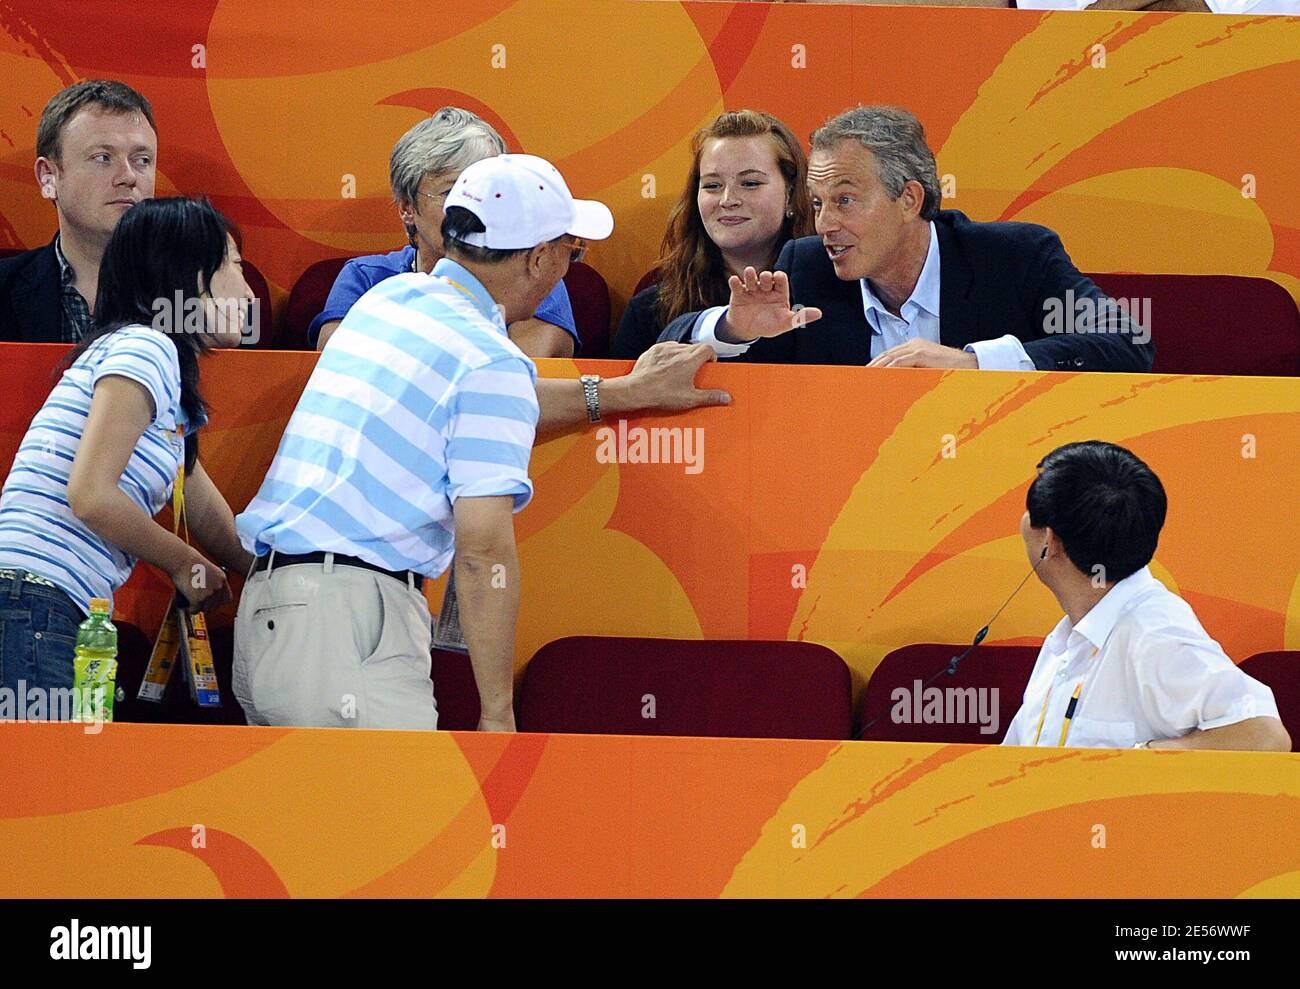 Former prime minister Tony Blair with Daughter Kathryn (L), Wife's mother Gail Booth and his son Leo support UK Cyclist team during the Beijing Olympic Games 2008, China on August 19, 2008. Photo by Gouhier-Hahn-Nebinger/ABACAPRESS.COM Stock Photo